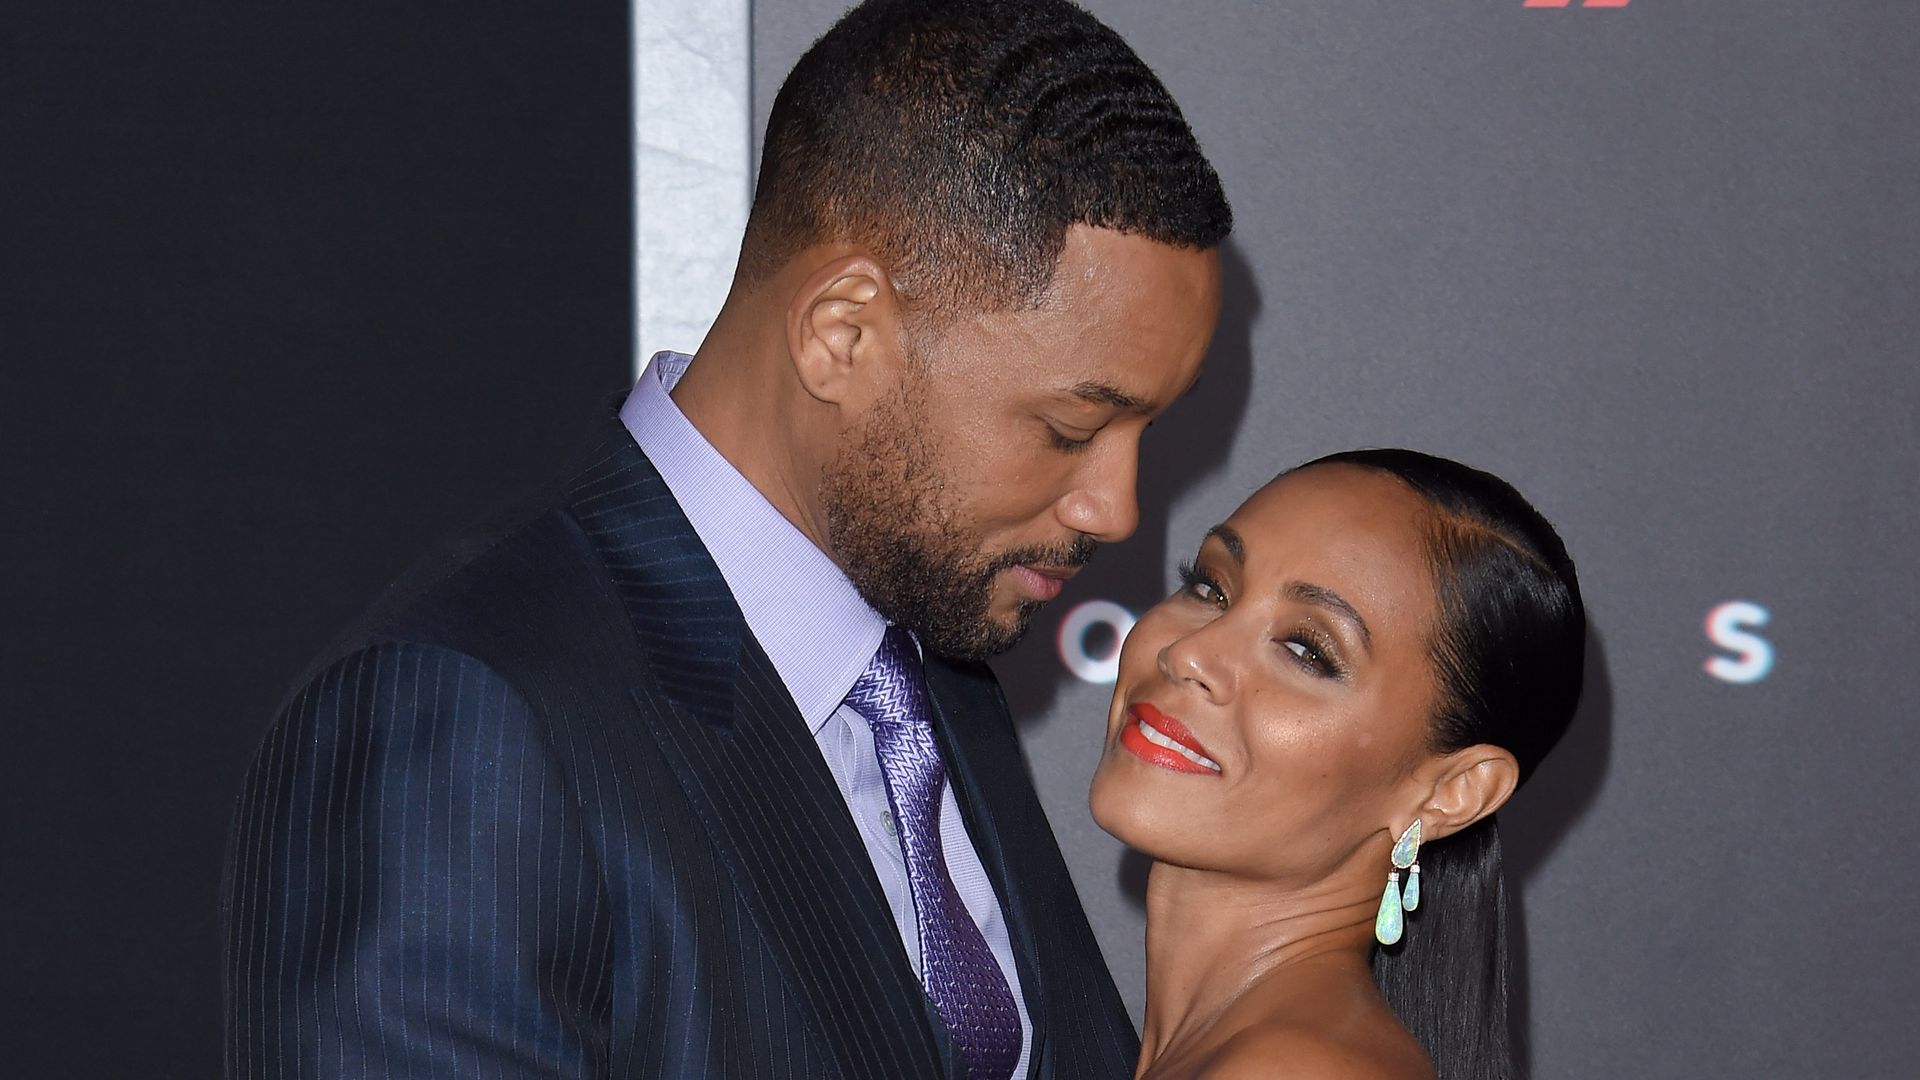 Inside Will Smiths 25-year+ marriage Jada Pinkett Smith never wanted HELLO! pic